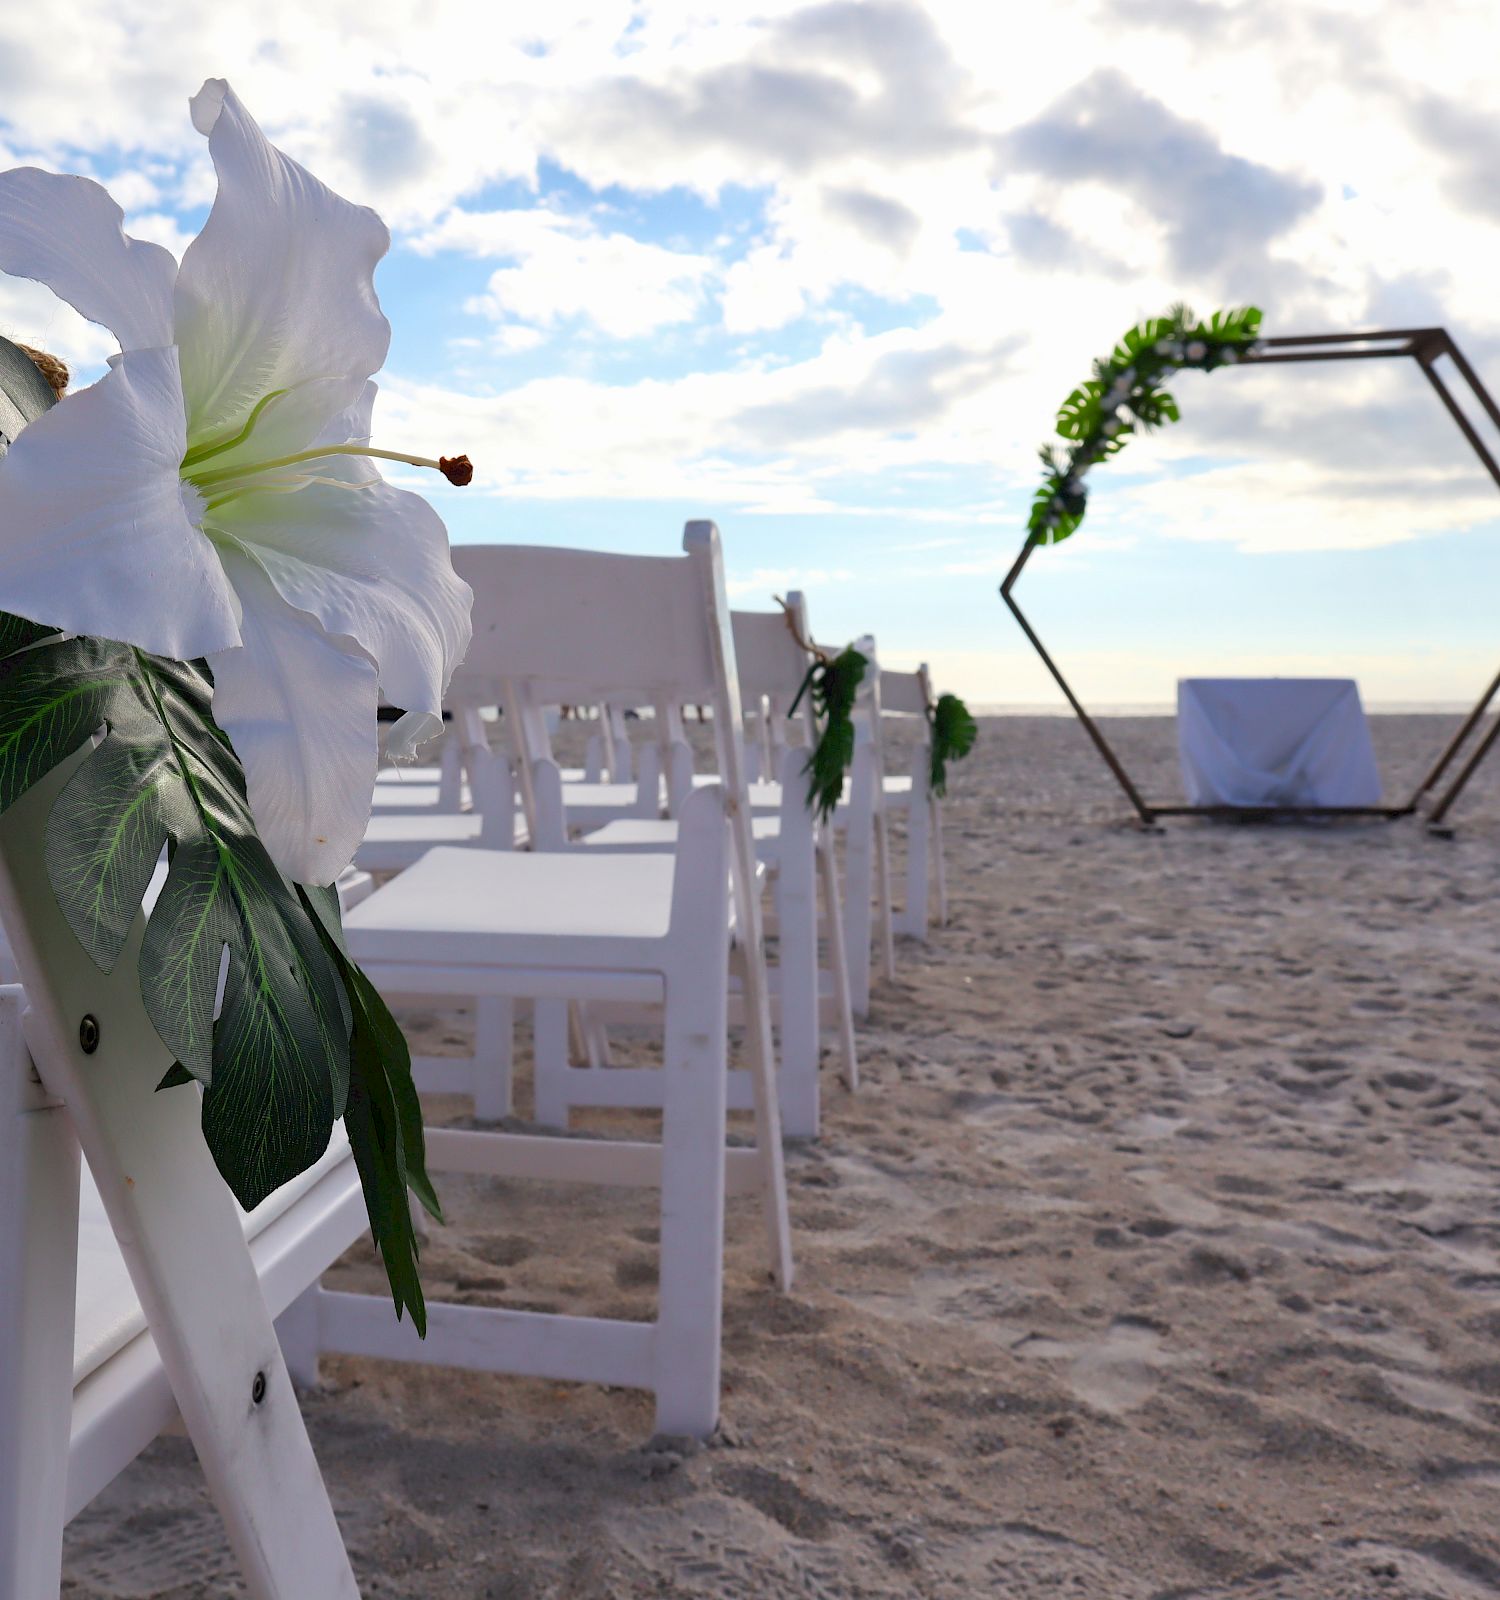 Outdoor beach wedding setup with white chairs, large white flowers, and a hexagonal arch decorated with greenery in the background, ending the sentence.